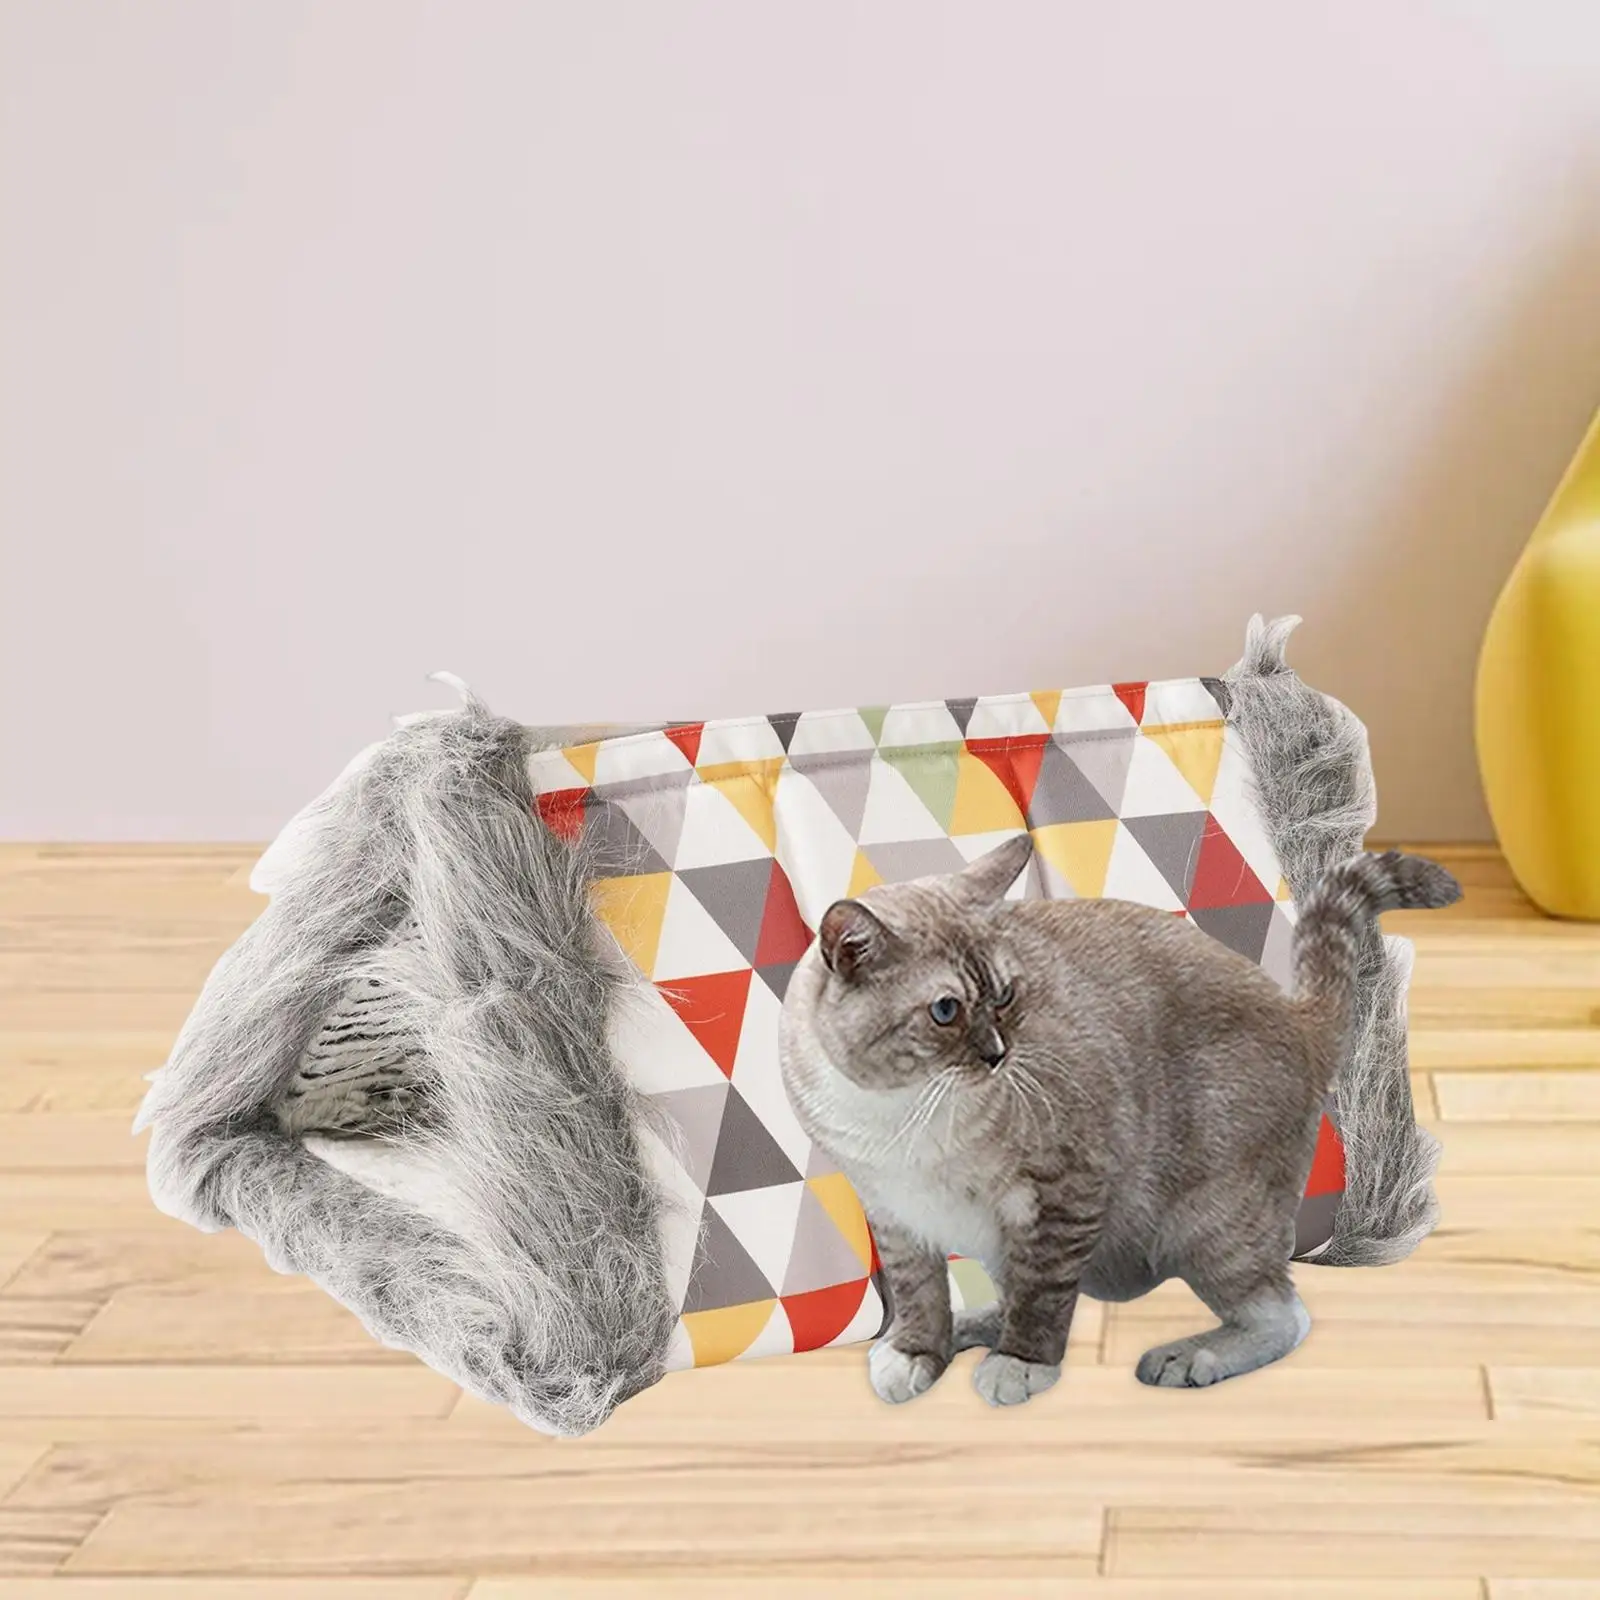 Dog Tent Cushion Pad Mat Sleep Self Warming Hut Cave Pet Bed Cat Warm House for Small Medium Dogs Rest Kitty Calming Indoor Cats